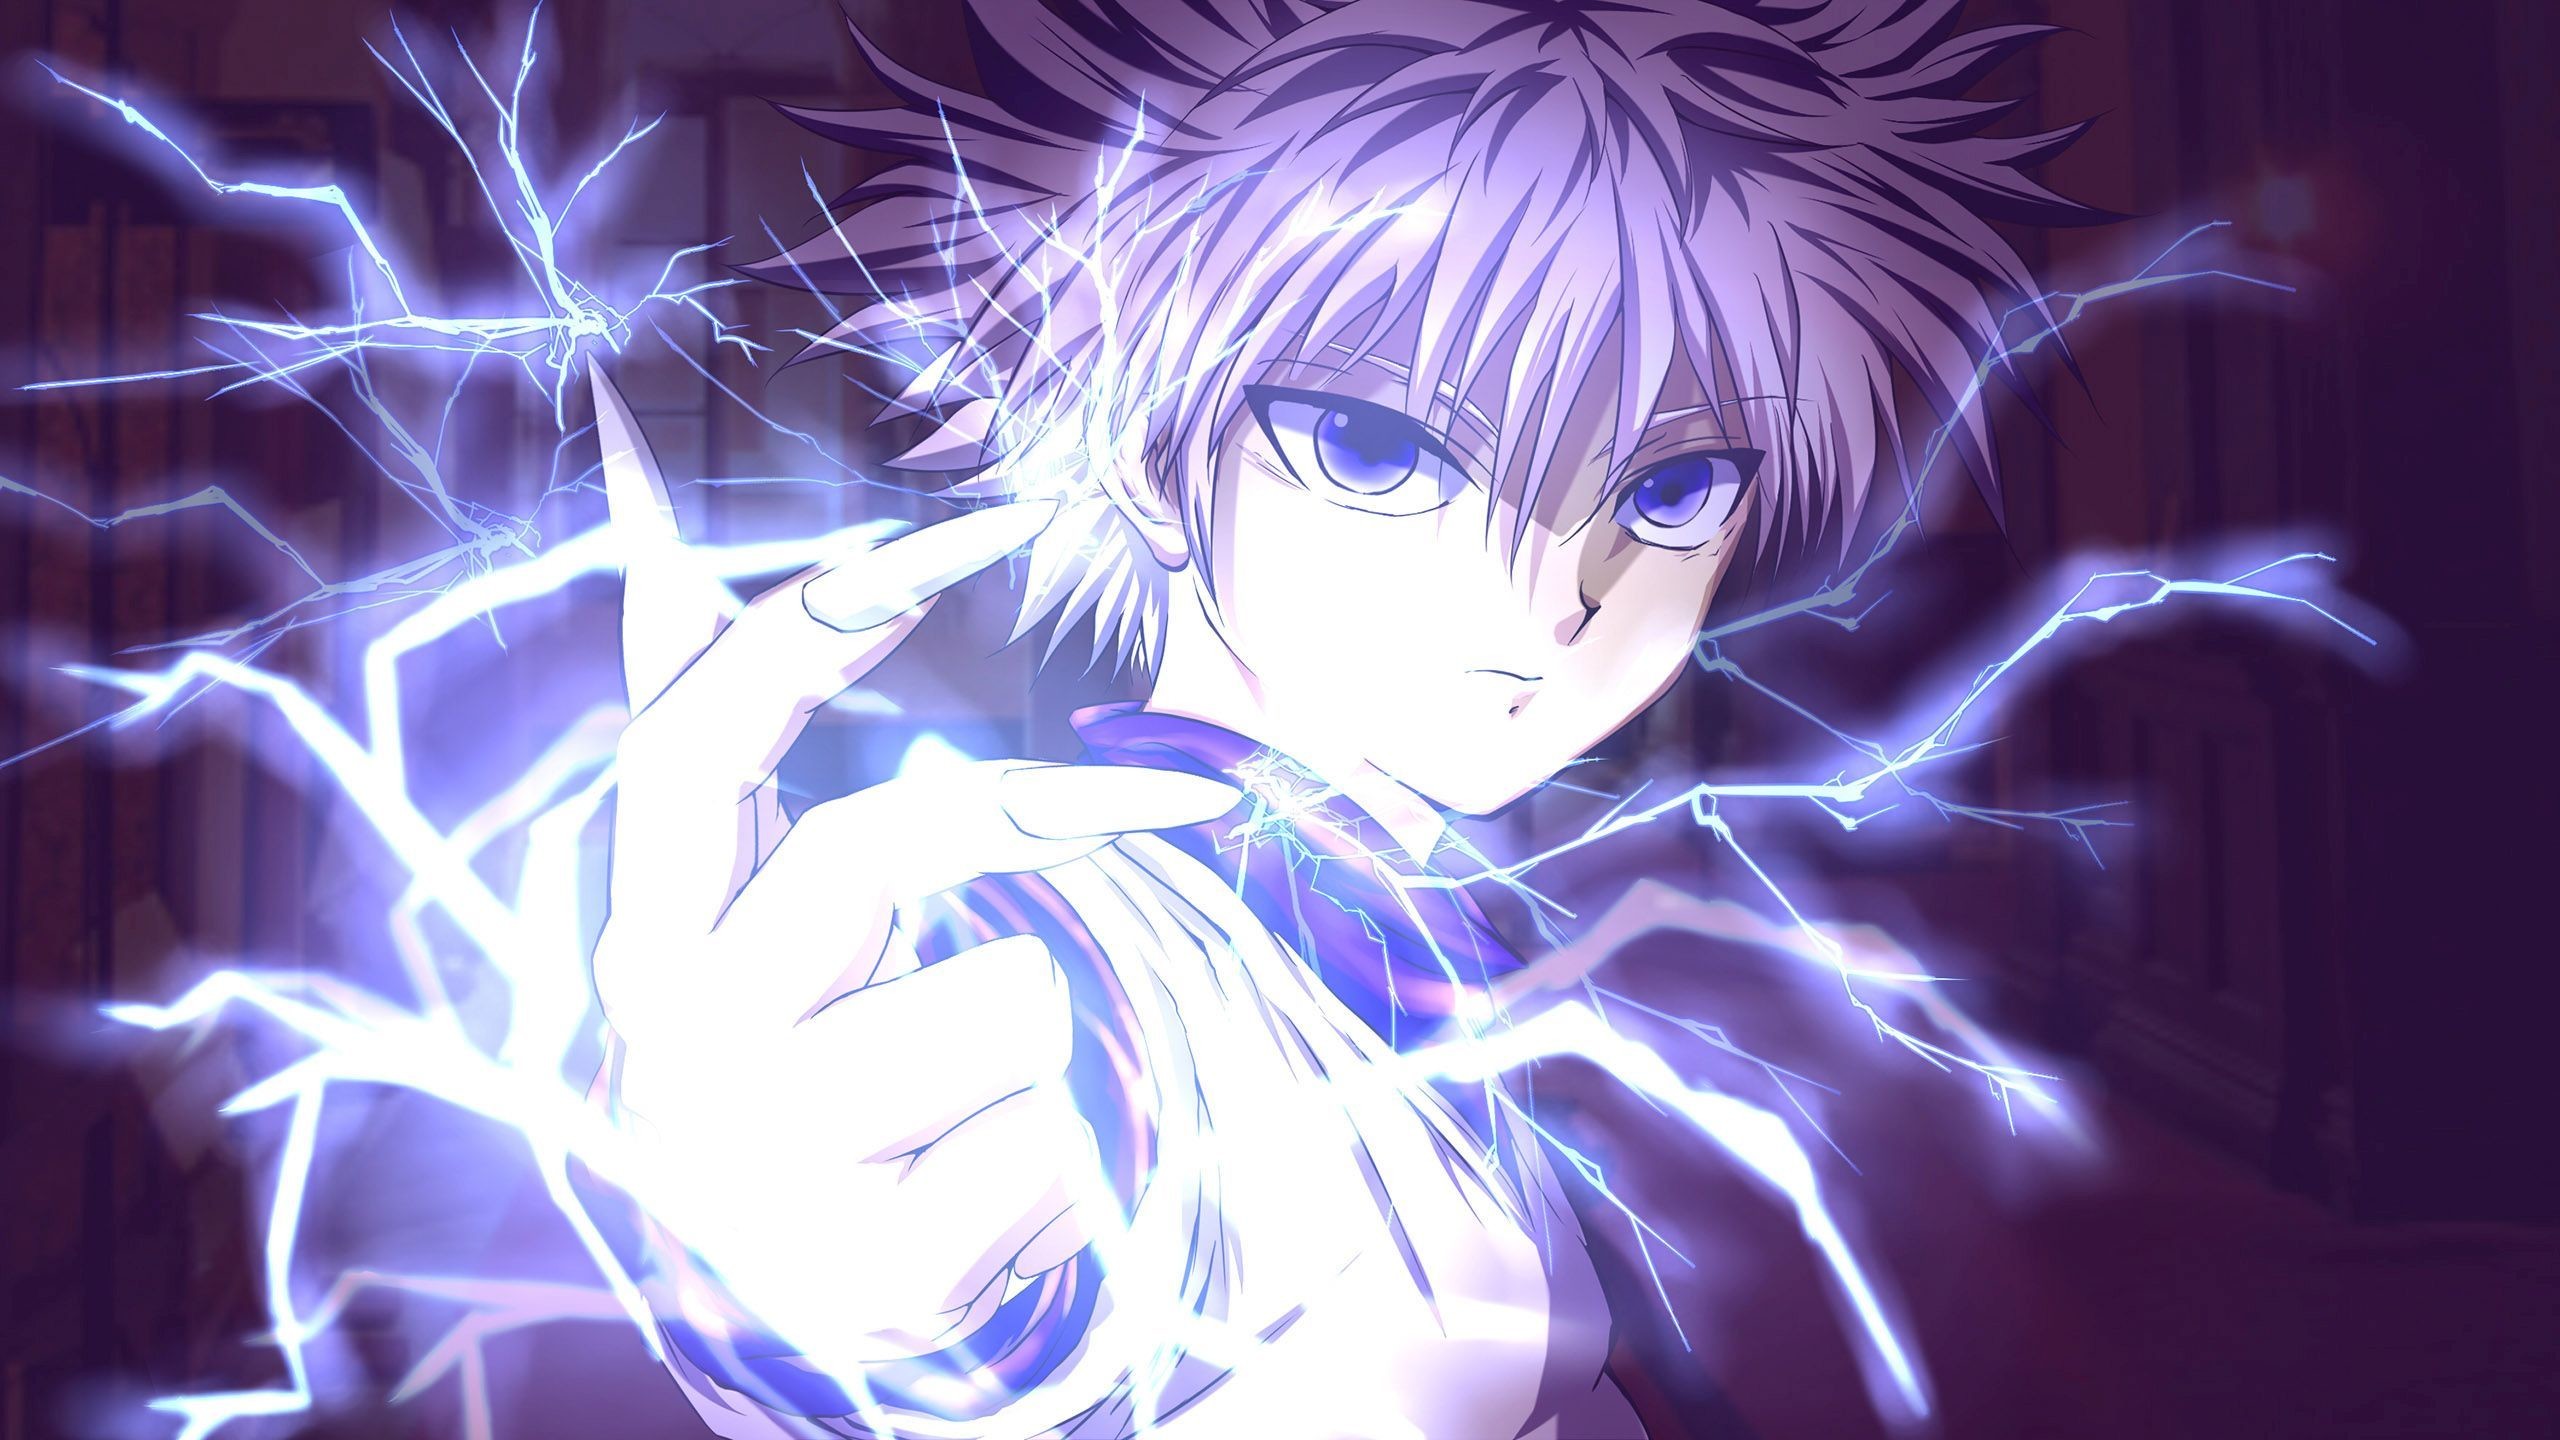 Hunter X Hunter Wallpapers Download Group (69+)